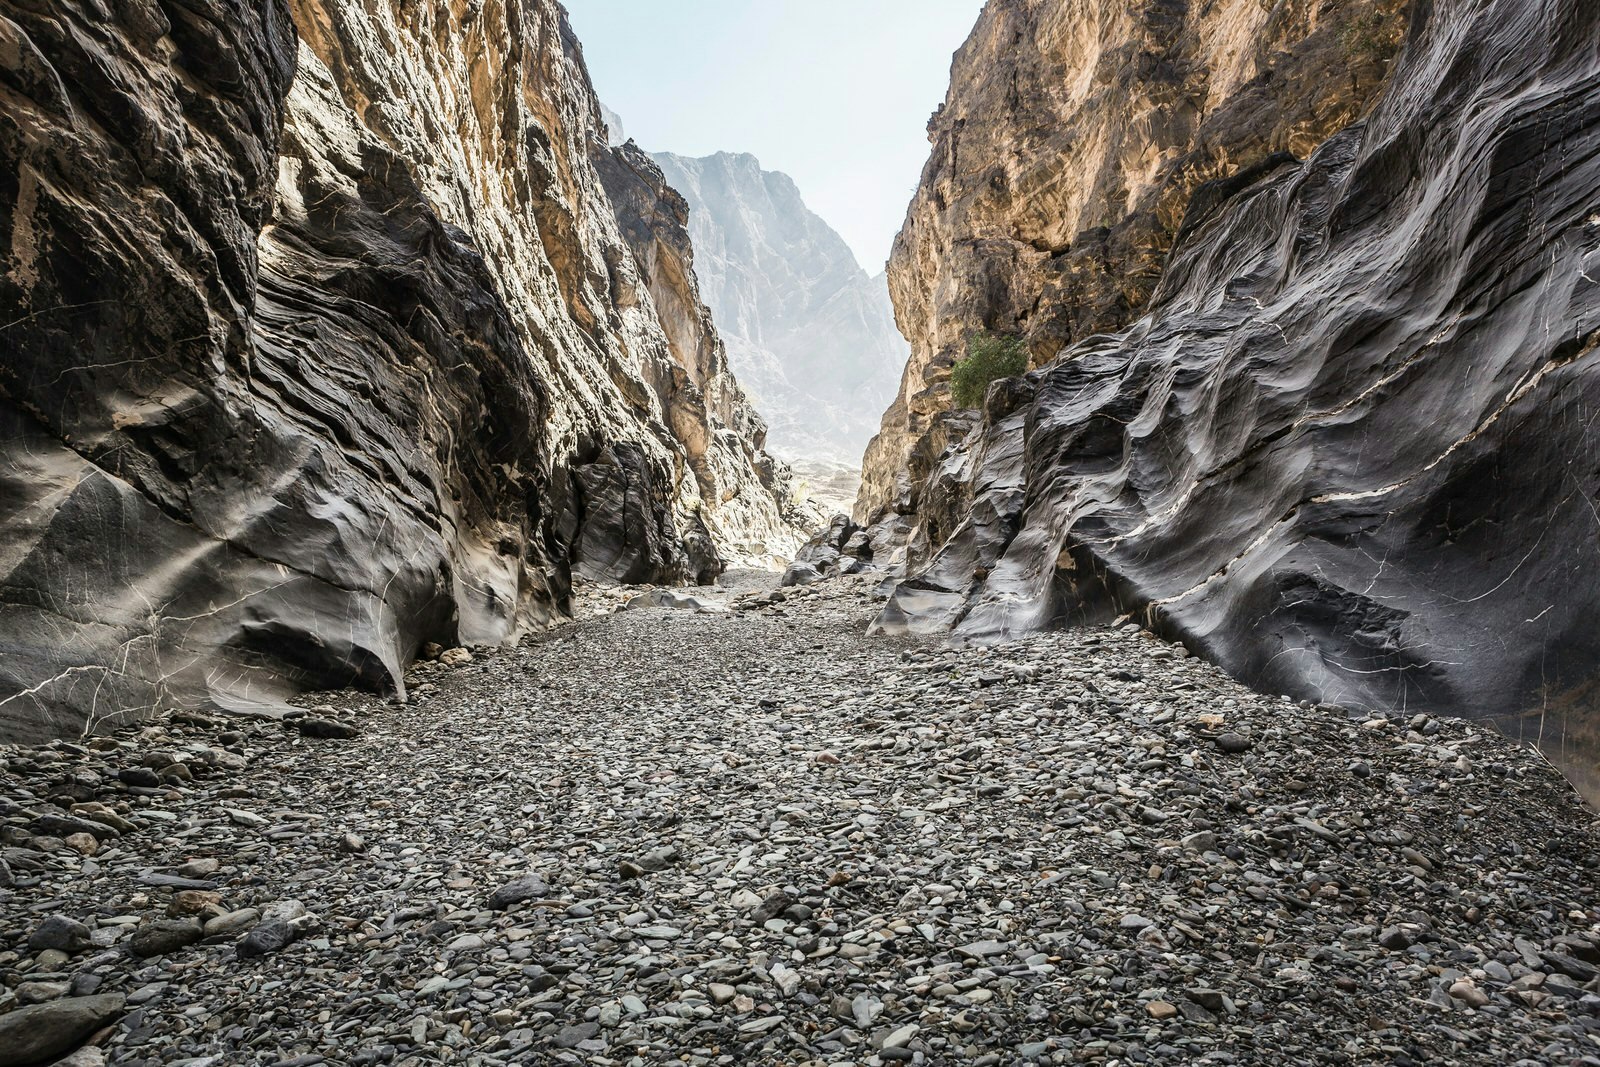 View of Wadi Bani Awf, Snake Gorge, Oman © Cultura RM Exclusive / Annie Engel / Getty Images